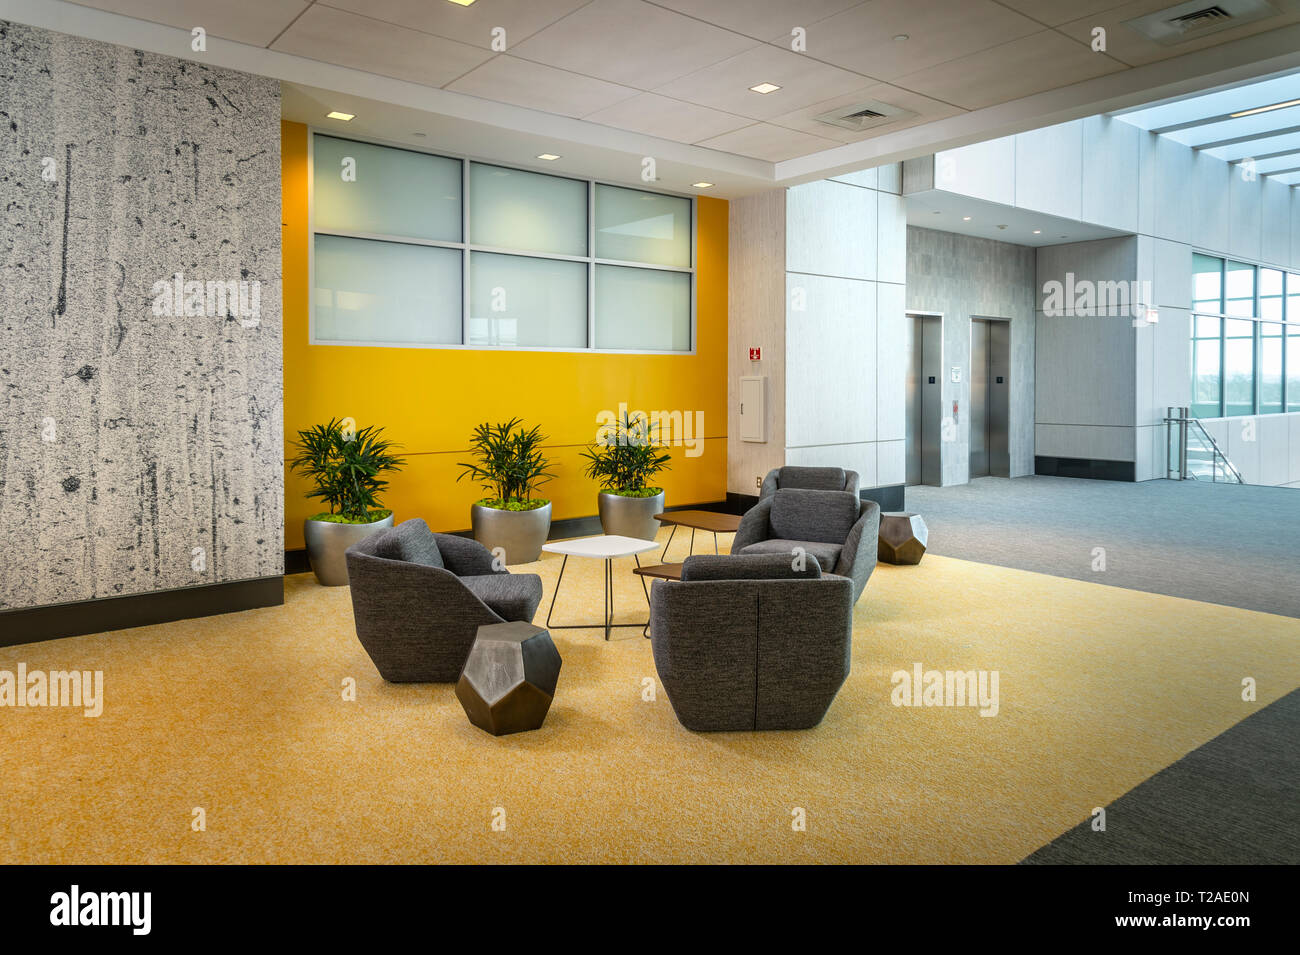 Commercial Office Building Interior Large Hallway With Seating, Philadelphia, PA USA Stock Photo